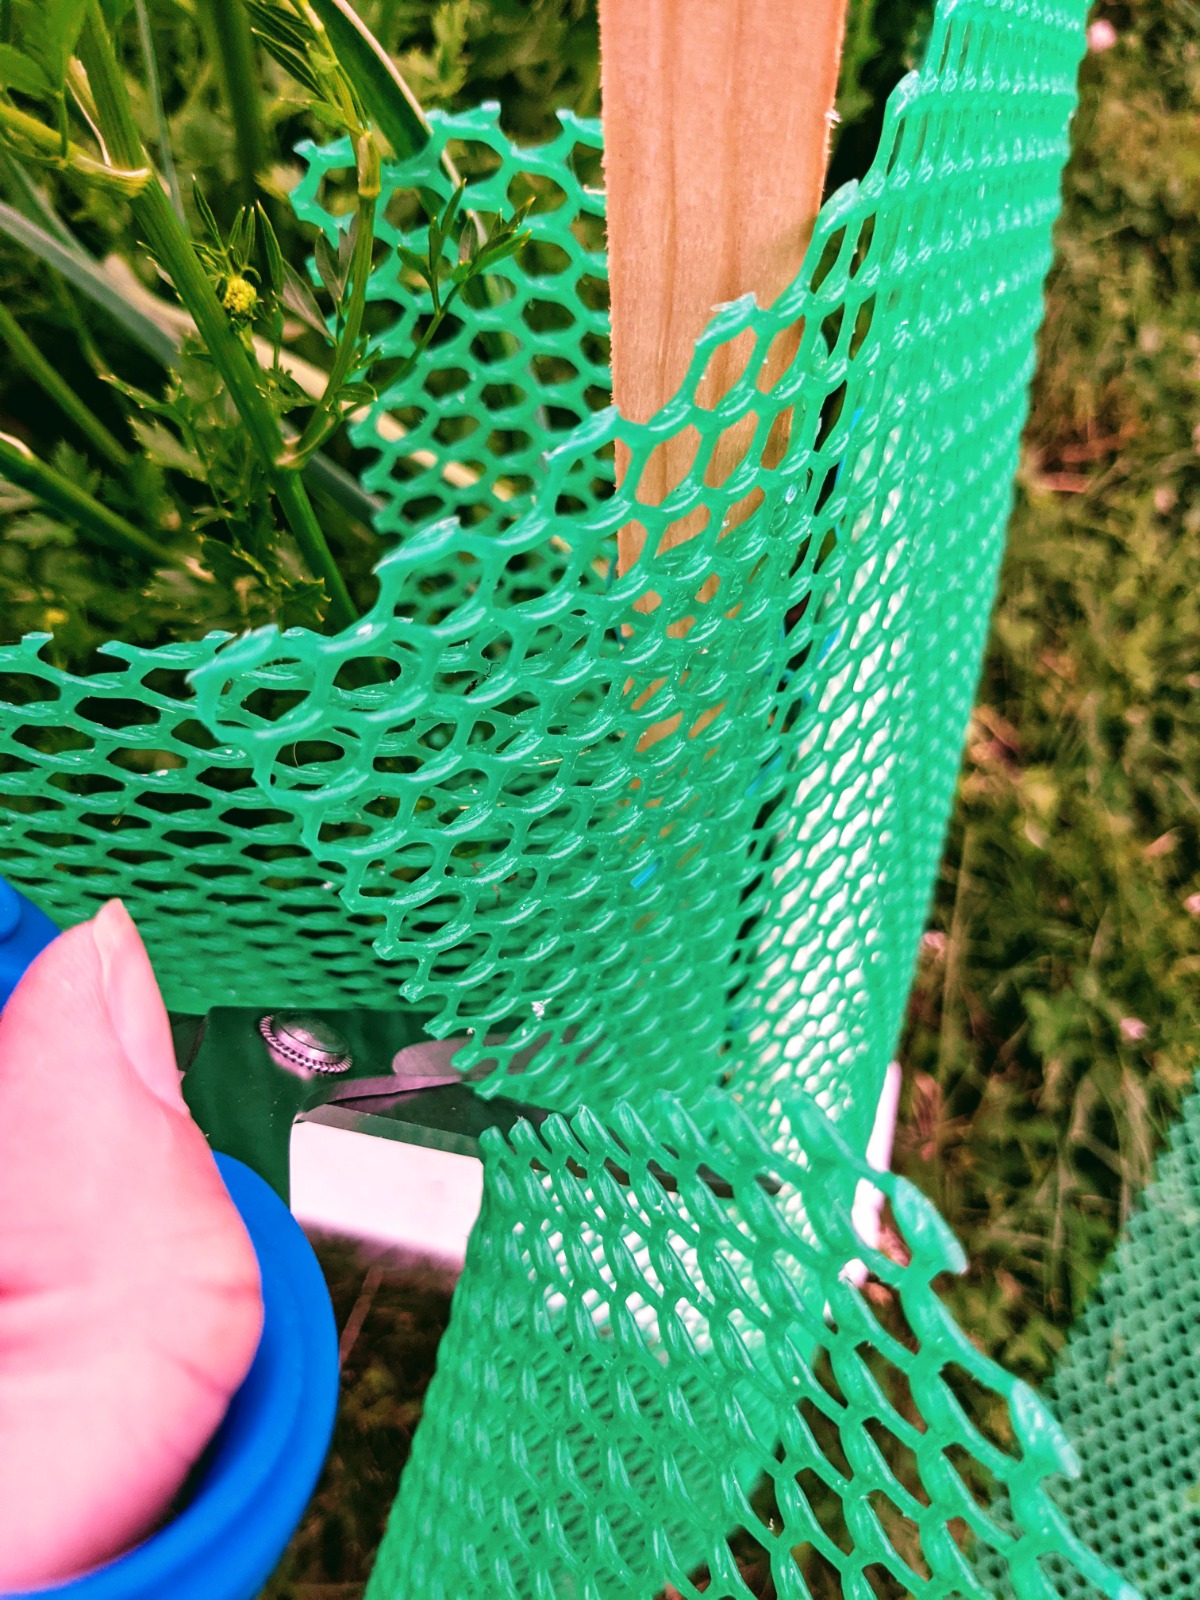 Cutting green plastic garden fencing with scissors